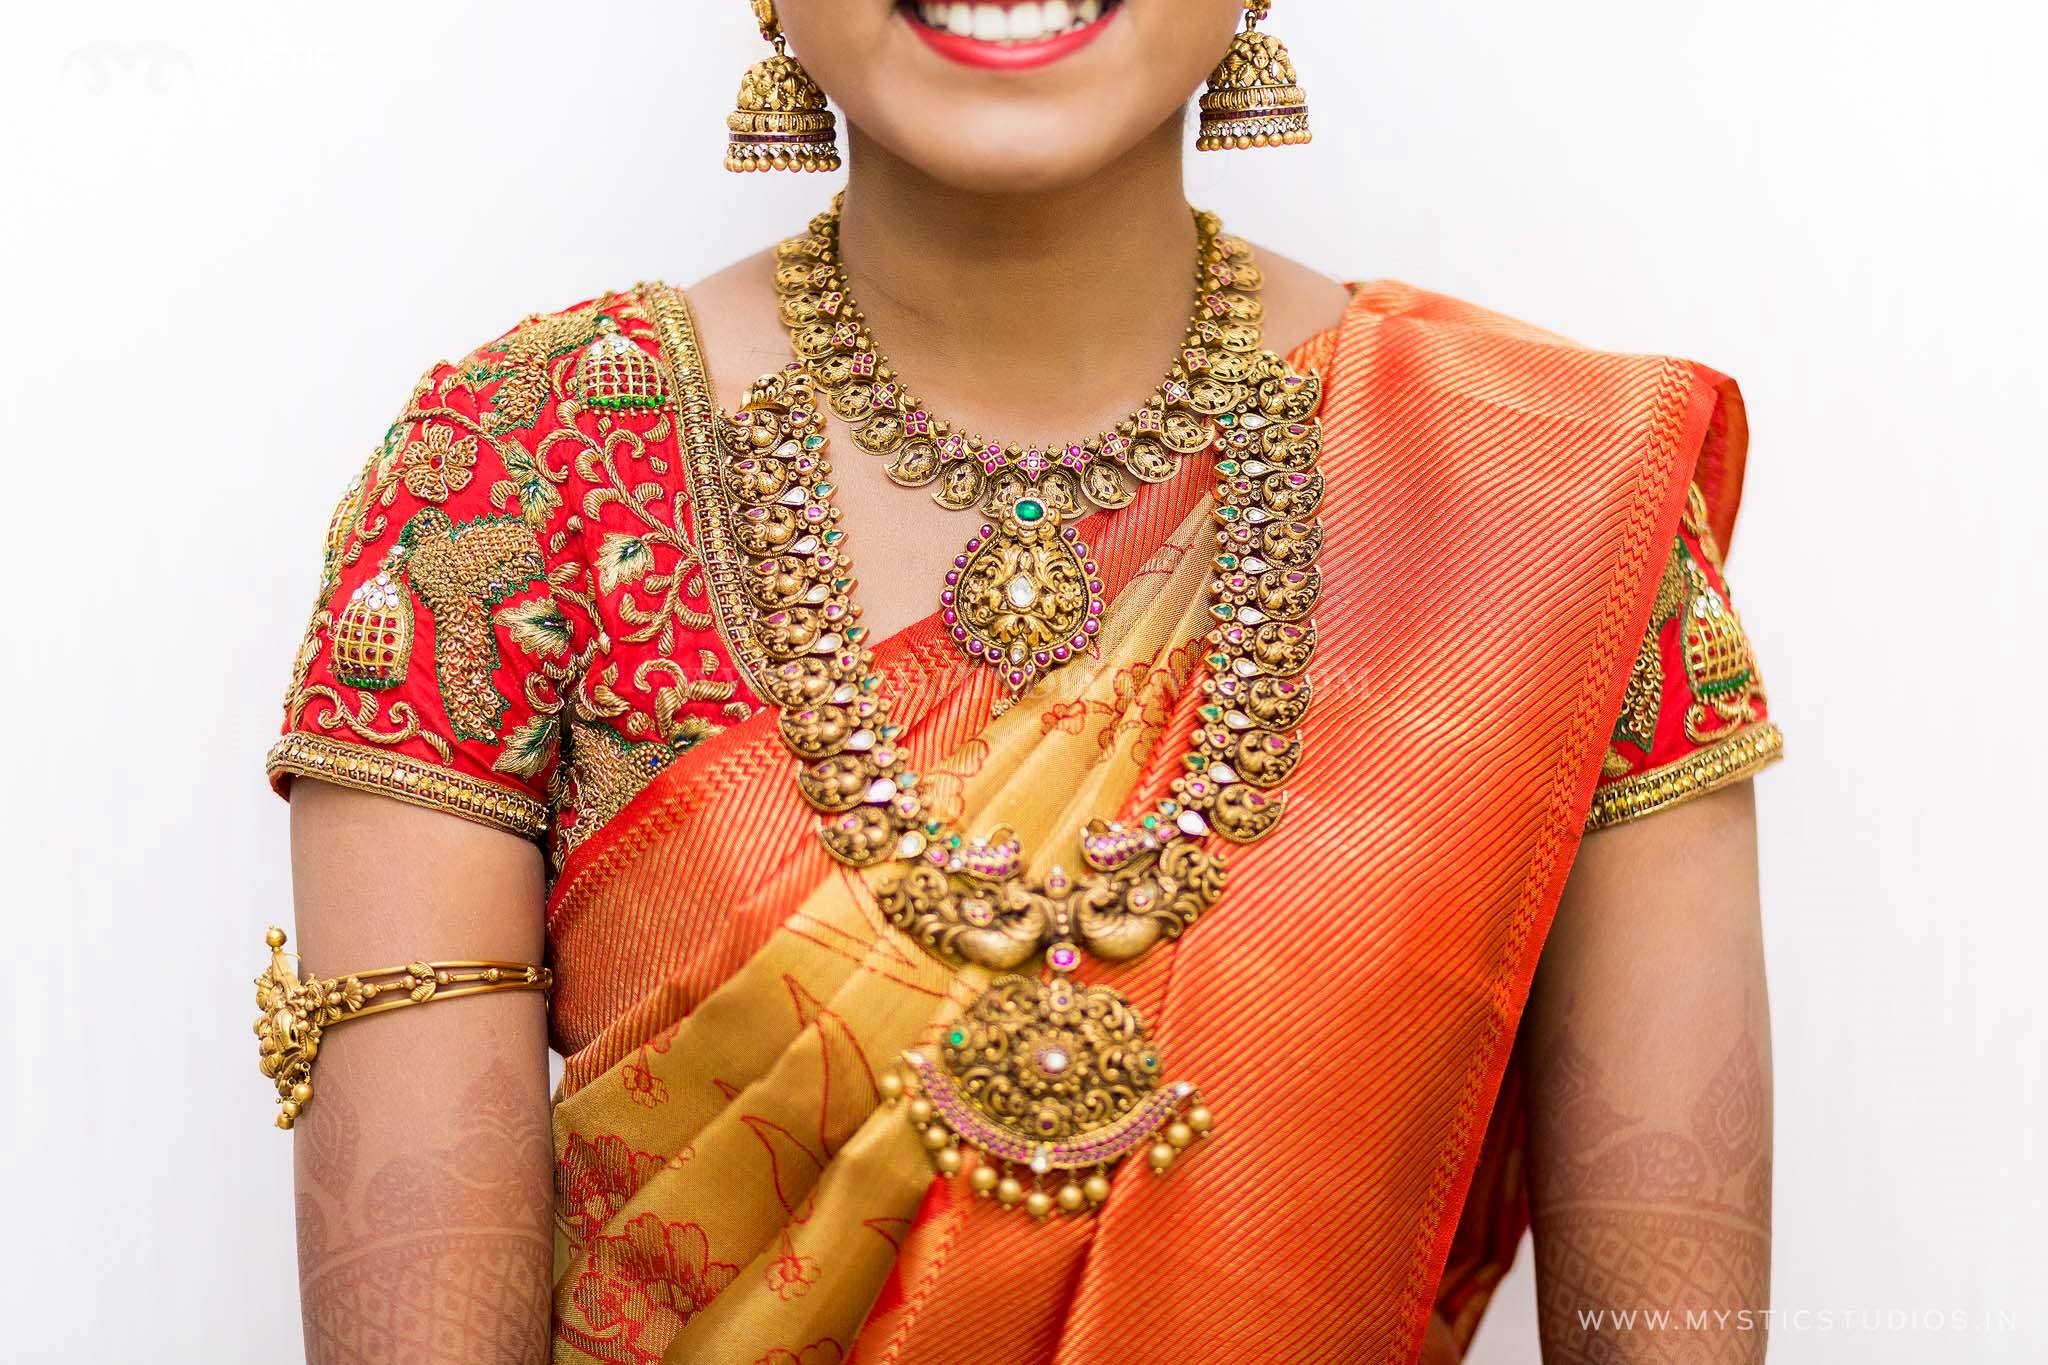 Indian Gold Jewellery On Bride